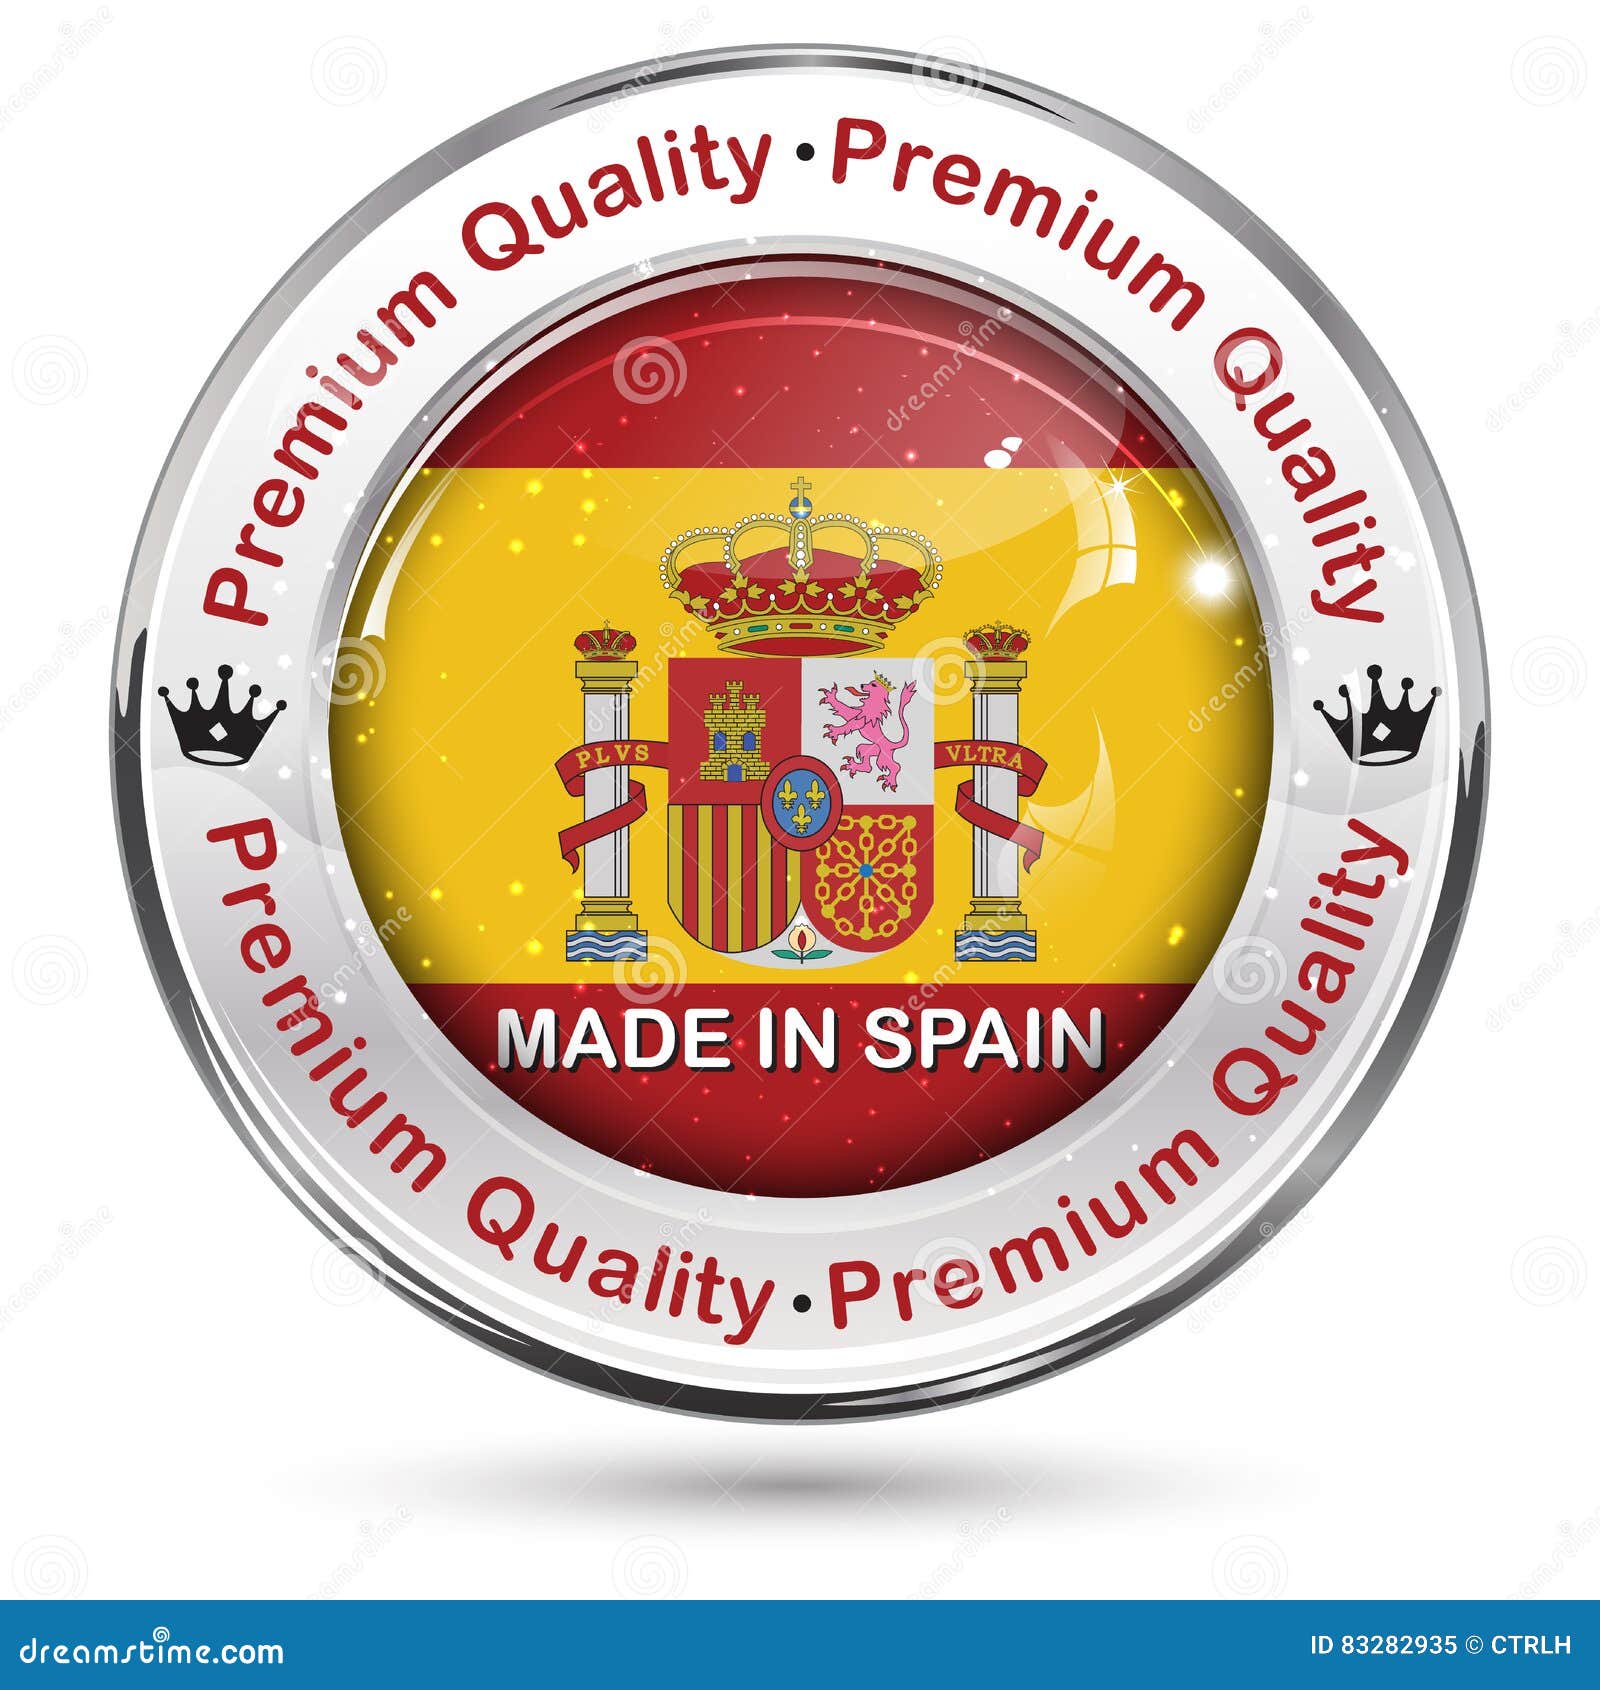 Made in Spain. Premium Quality Label / Button / Icon Stock Illustration ...